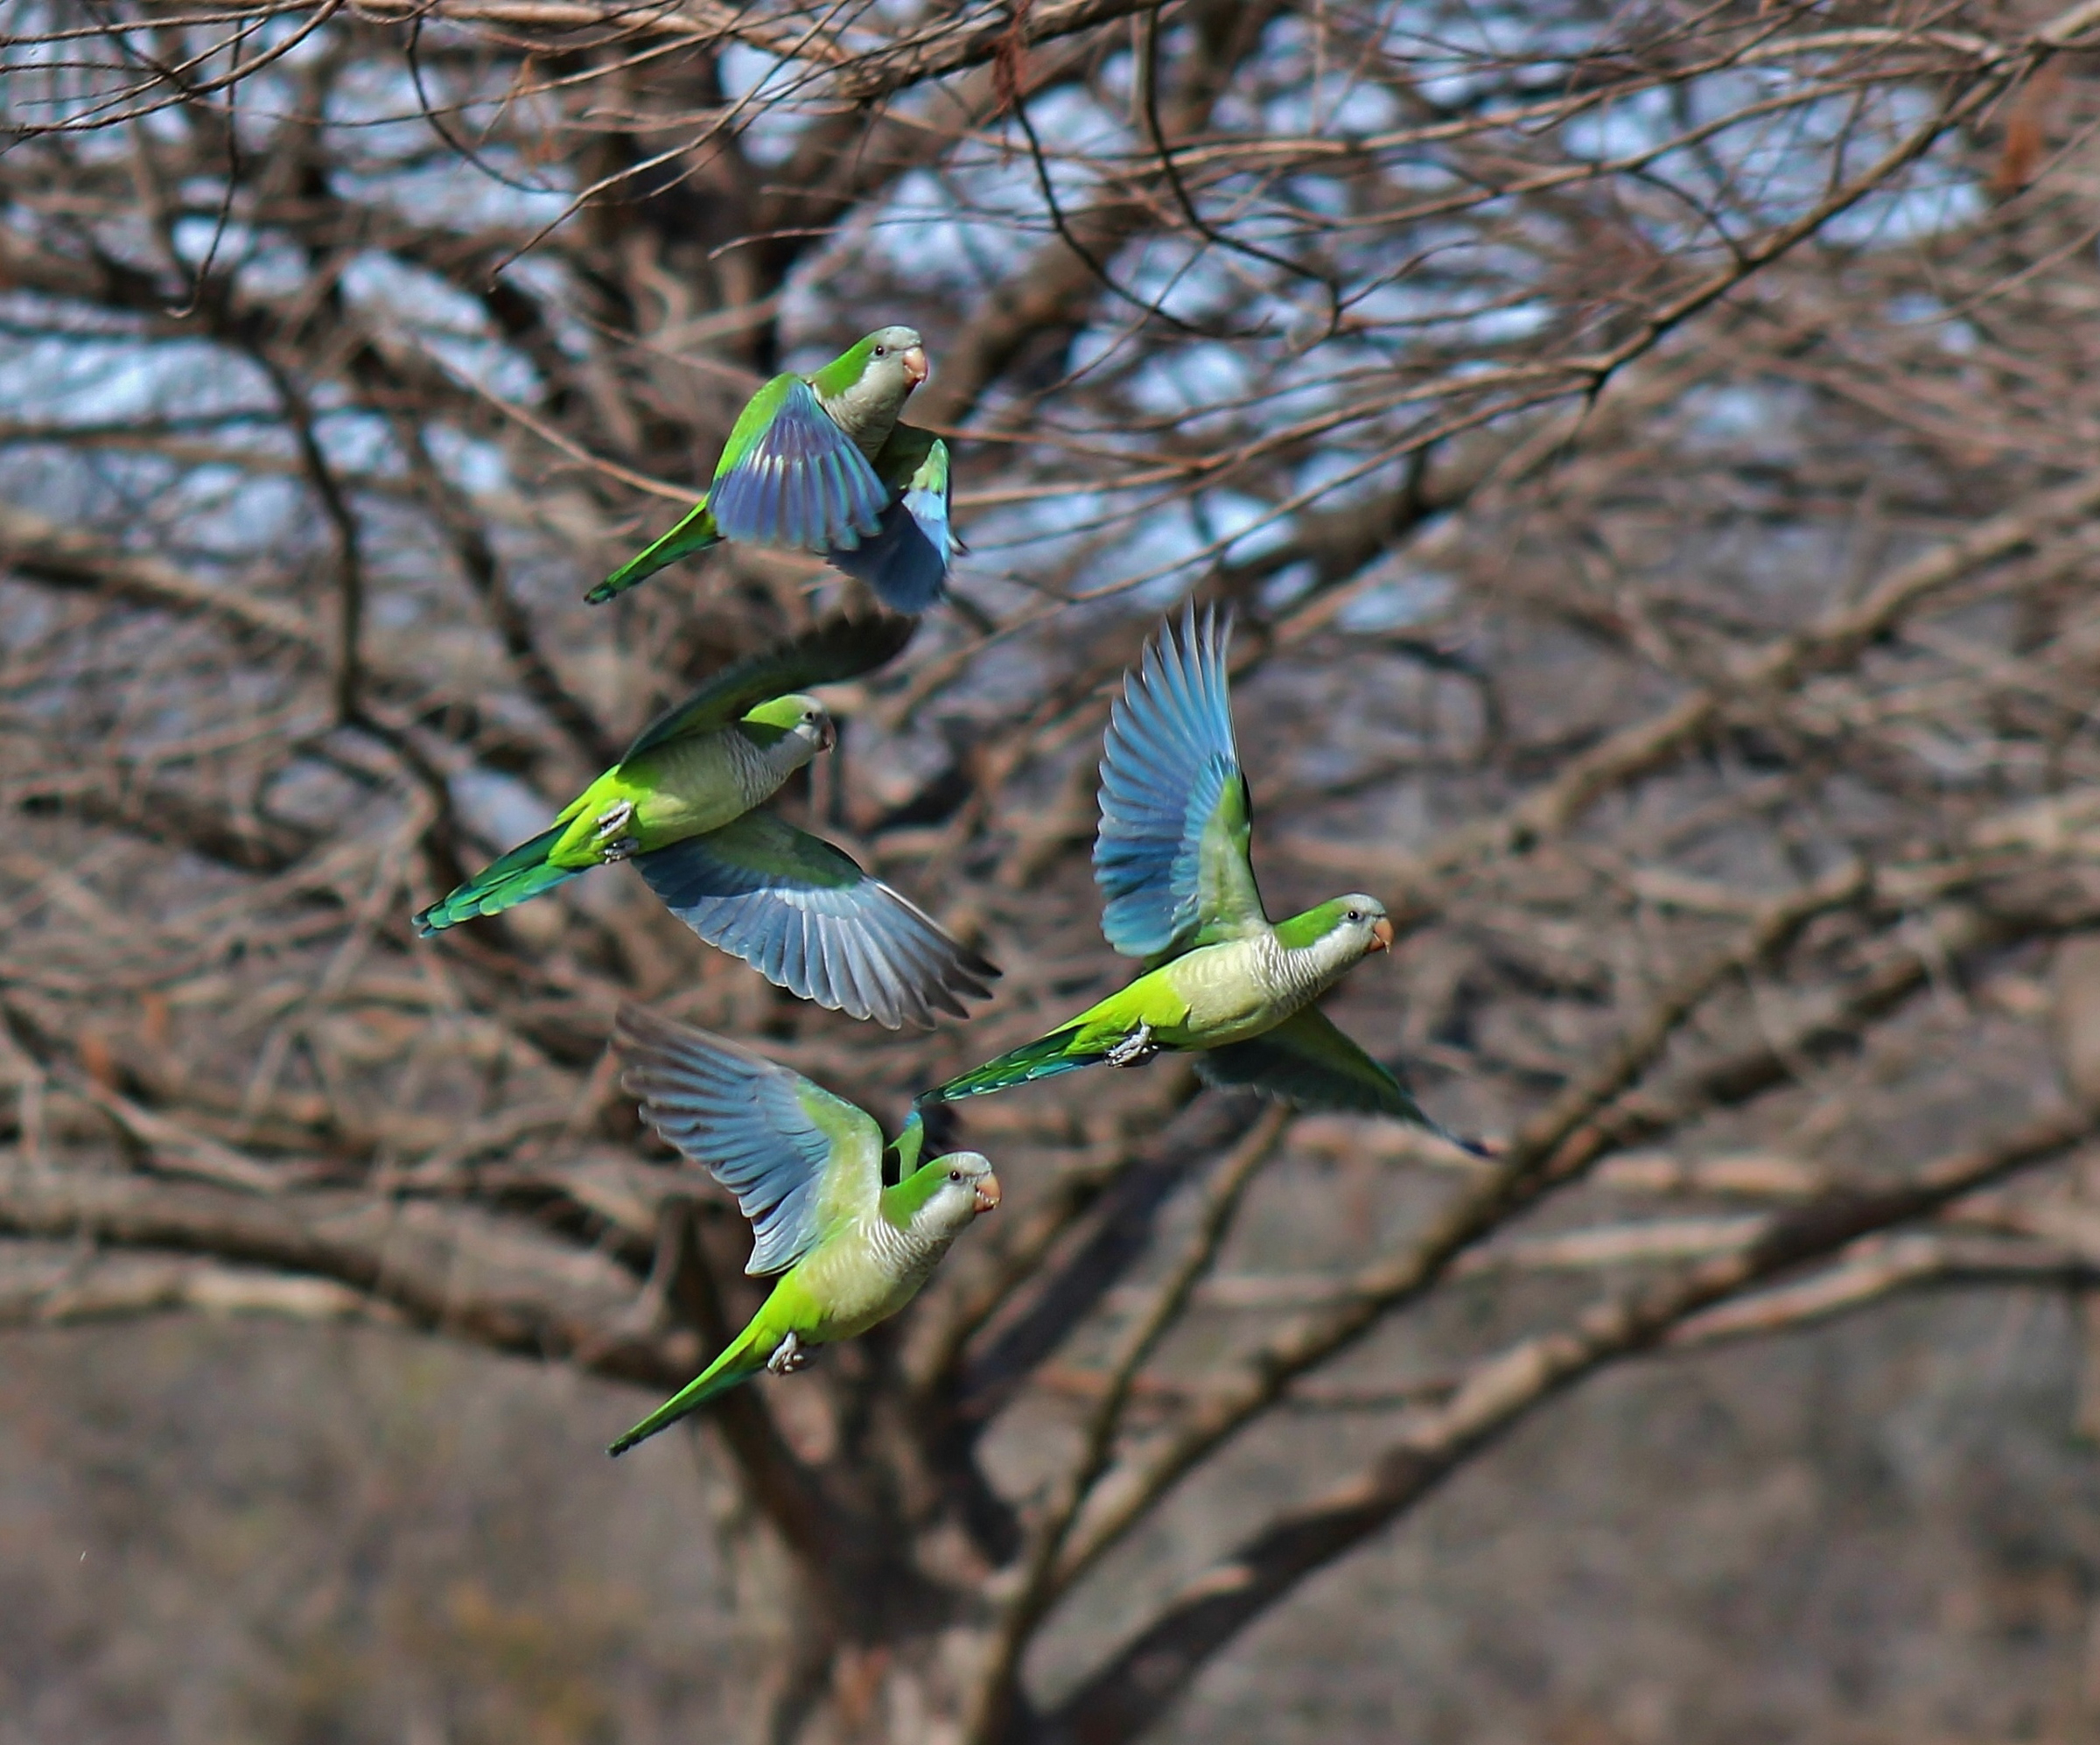 The Monk Parakeet’s rapid flight doesn’t often allow an opportunity to appreciate the rich blue of its flight feathers. Photo: Kelley Murphy/Audubon Photography Awards